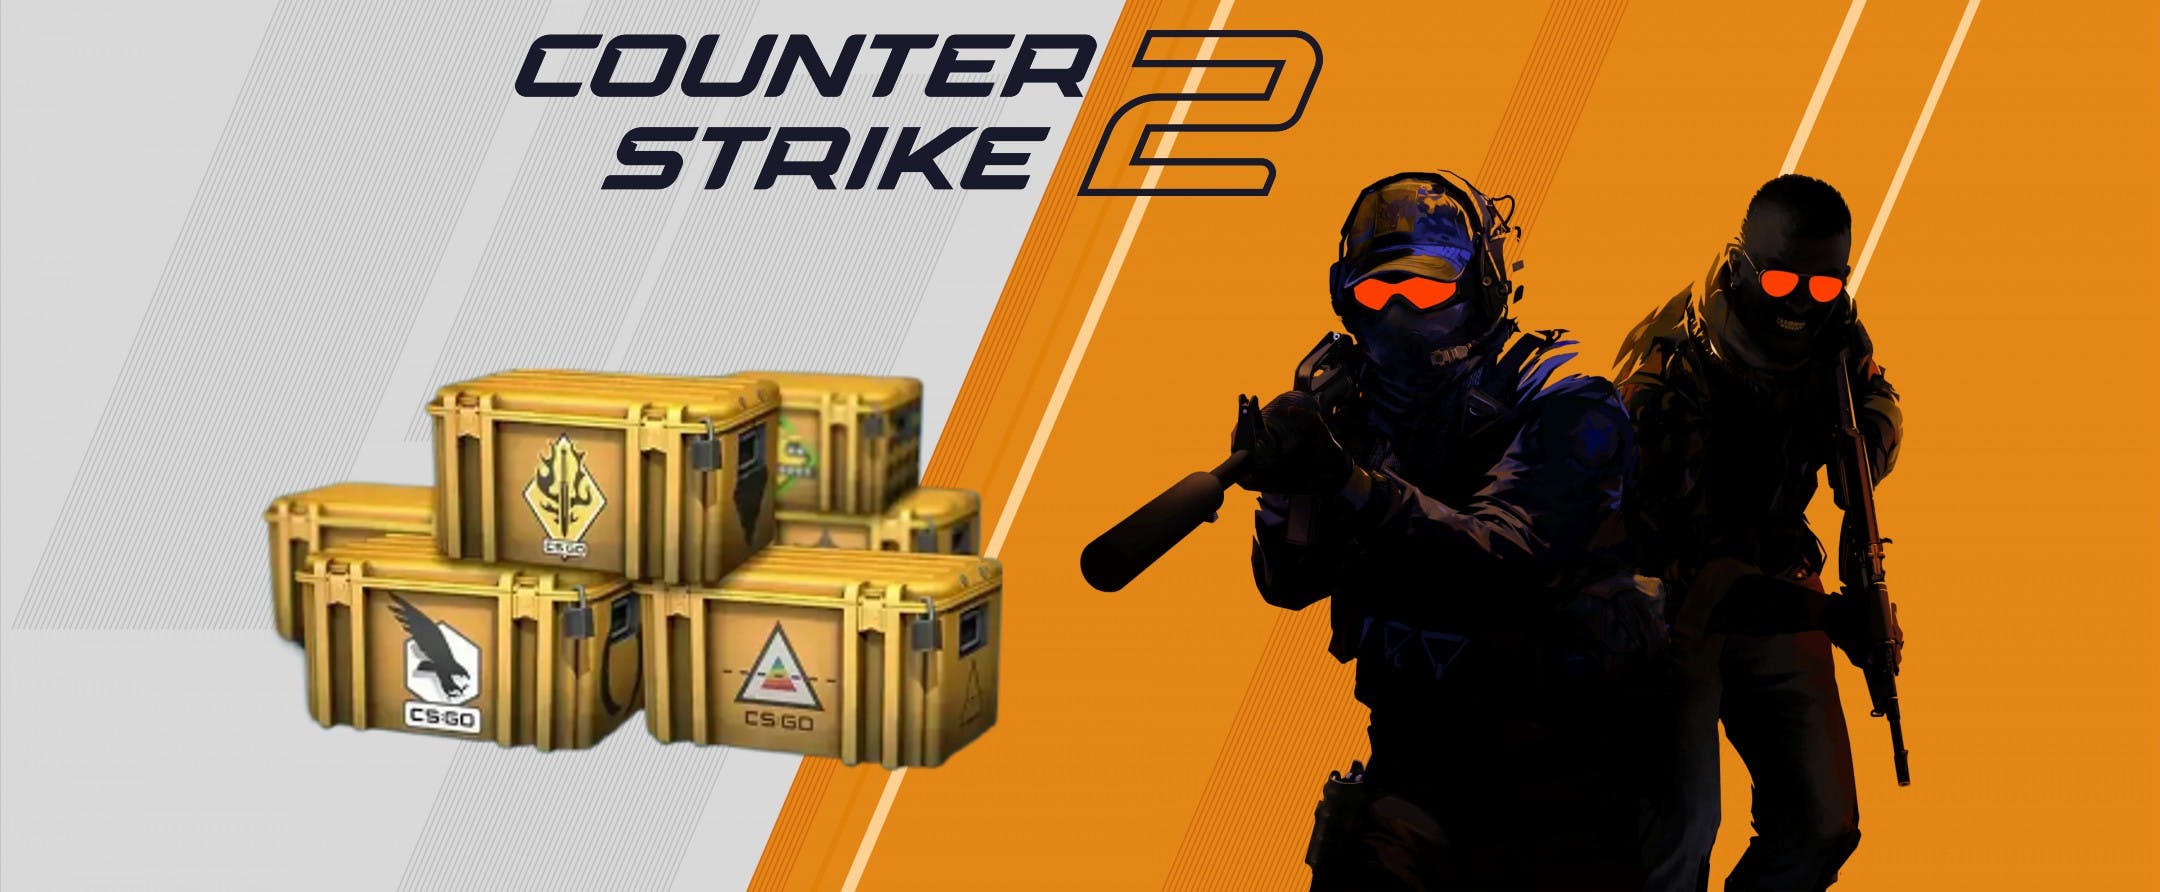 CS:GO's Operation Wildfire is live